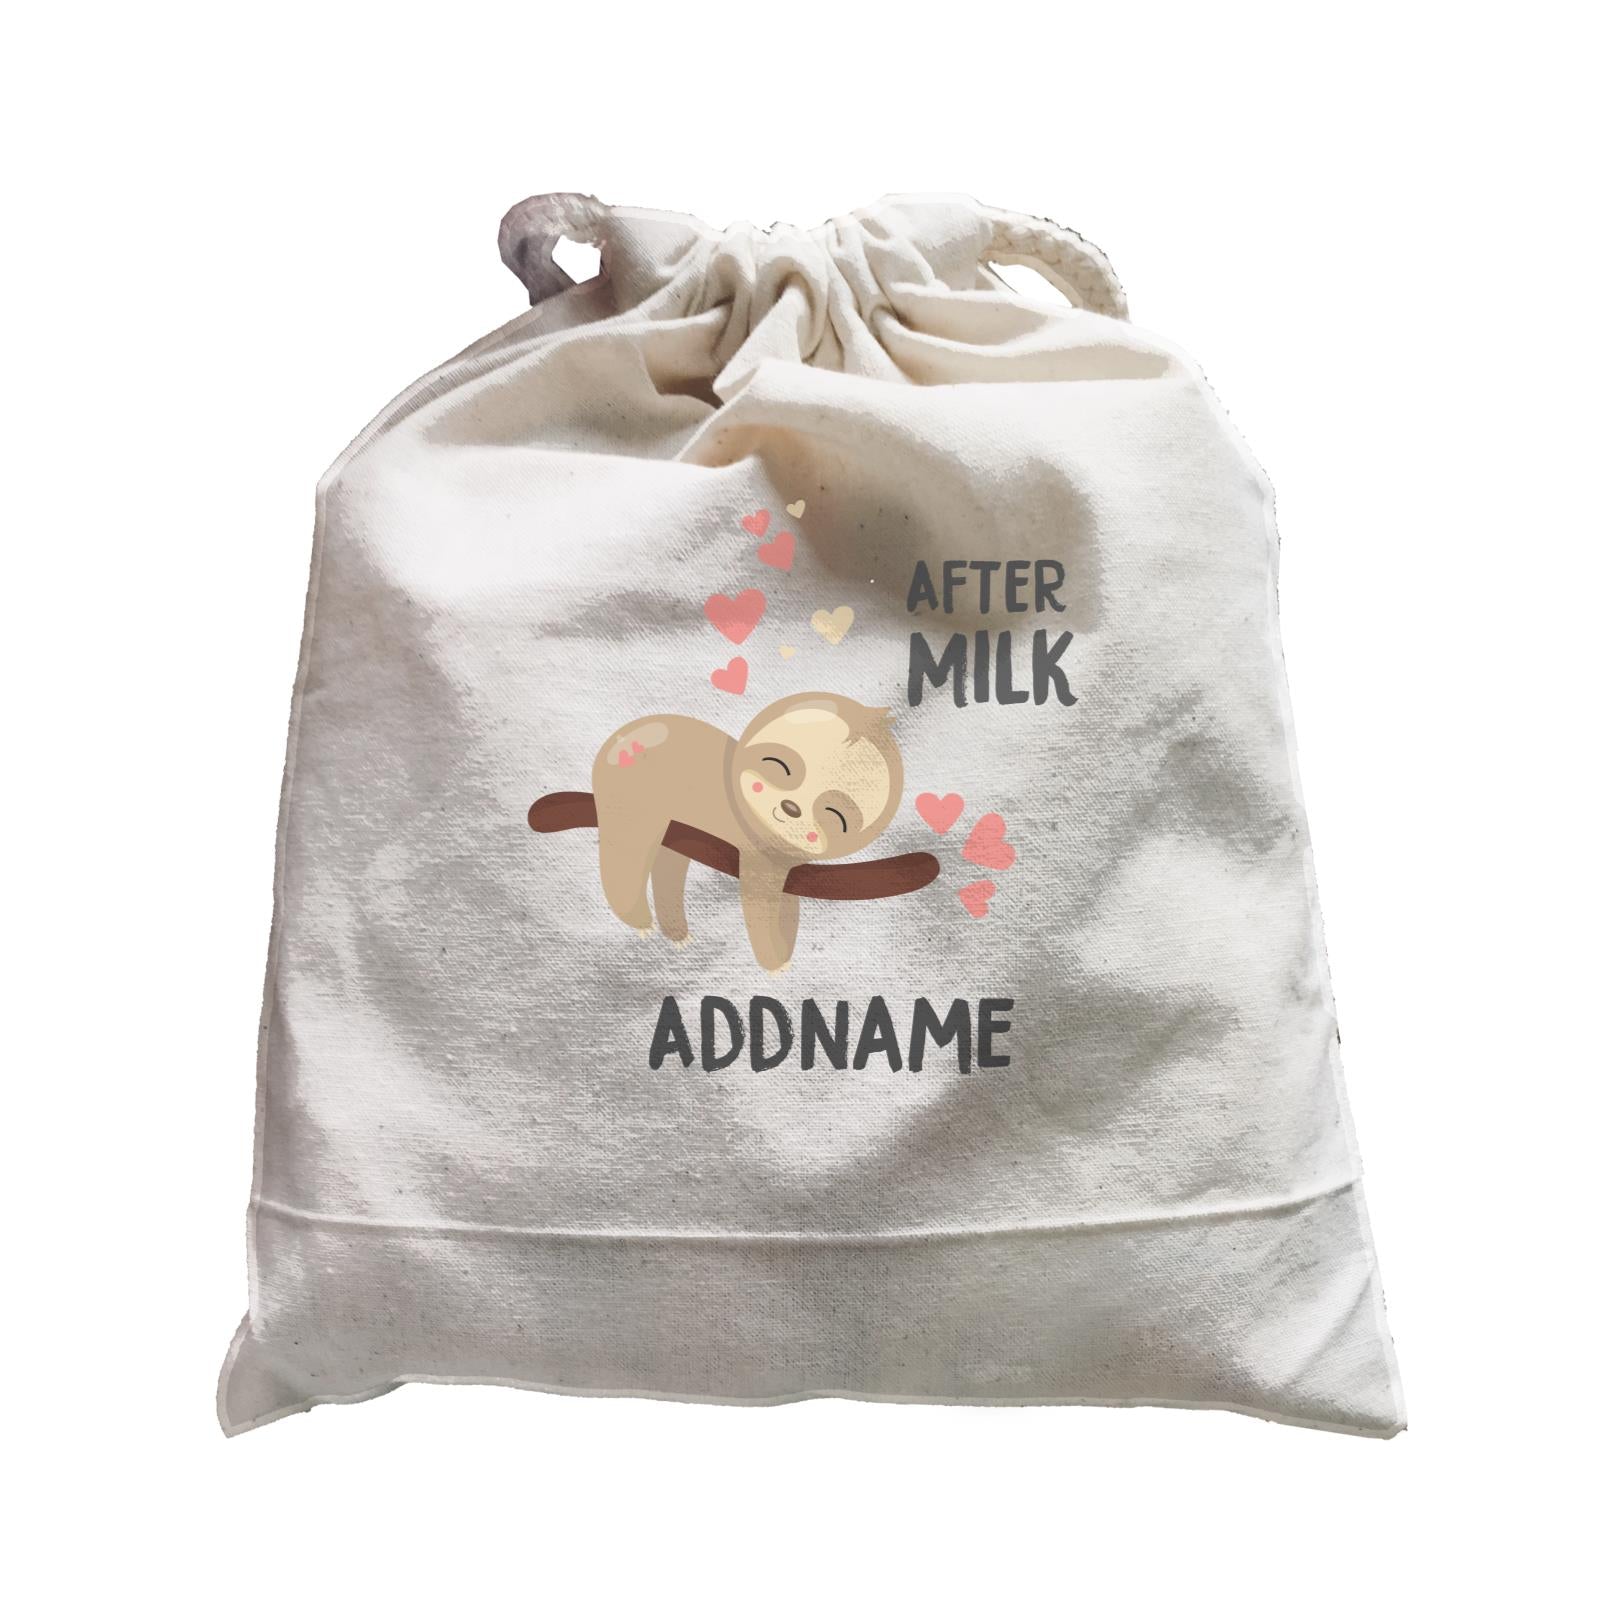 Cute Sloth After Milk Addname Satchel